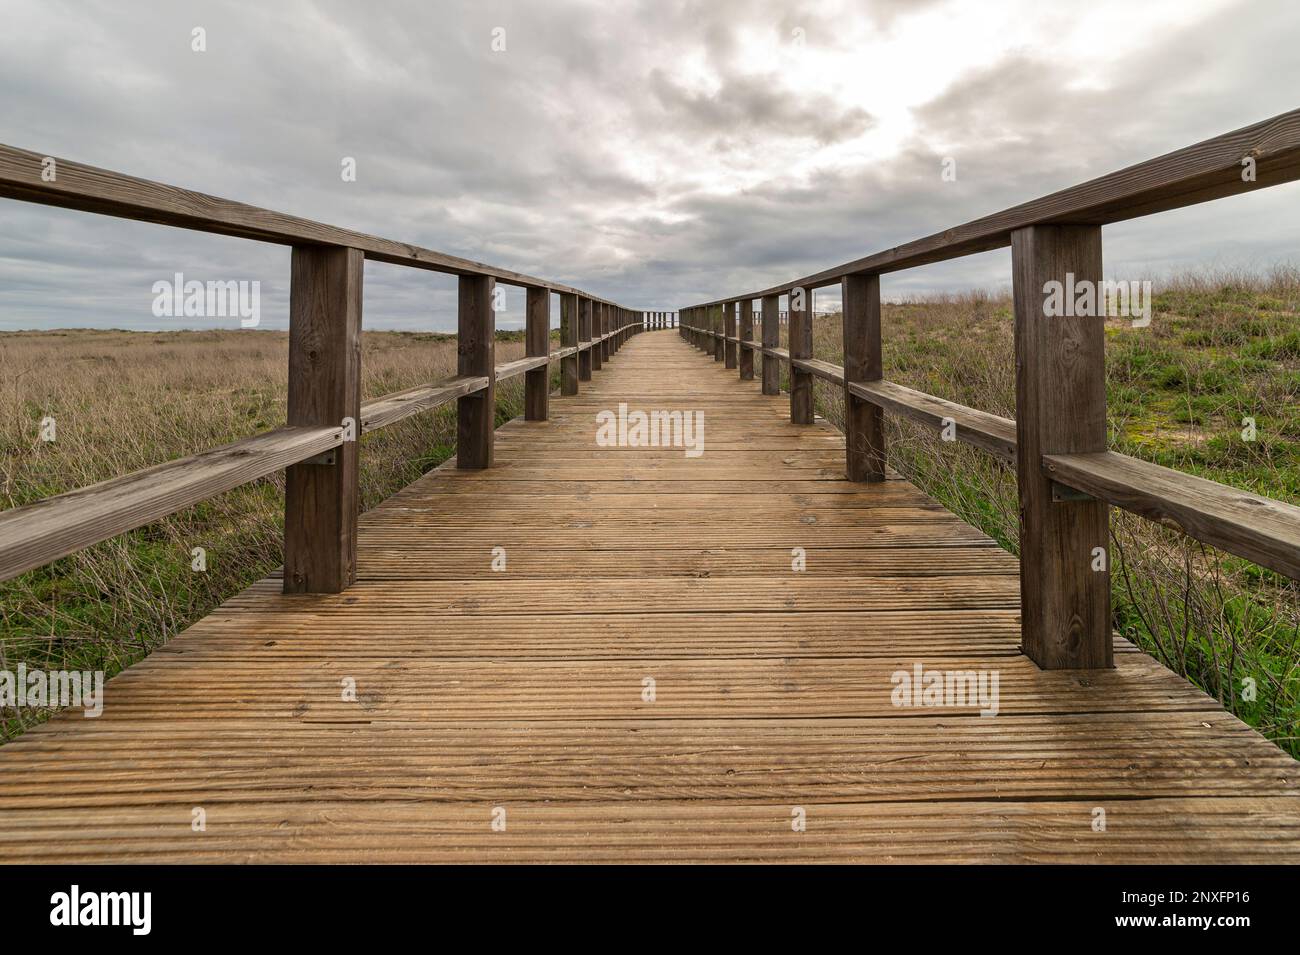 Wooden boardwalk with a cloudy sky Stock Photo